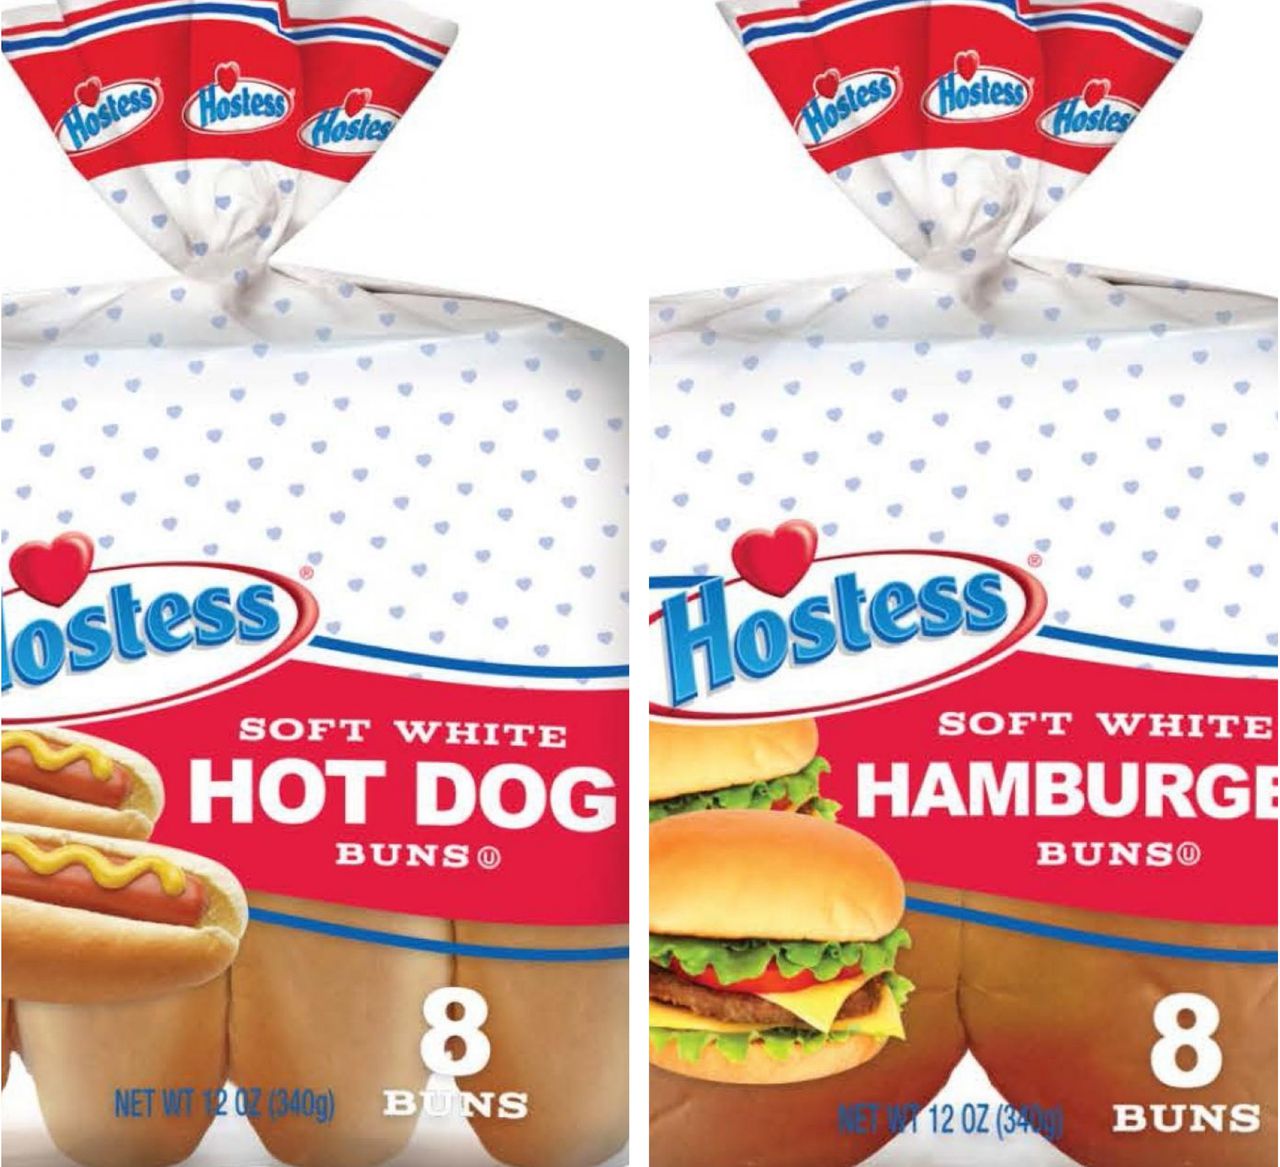 Hostess Buns Affected By Salmonella And Listeria Contamination Caution!